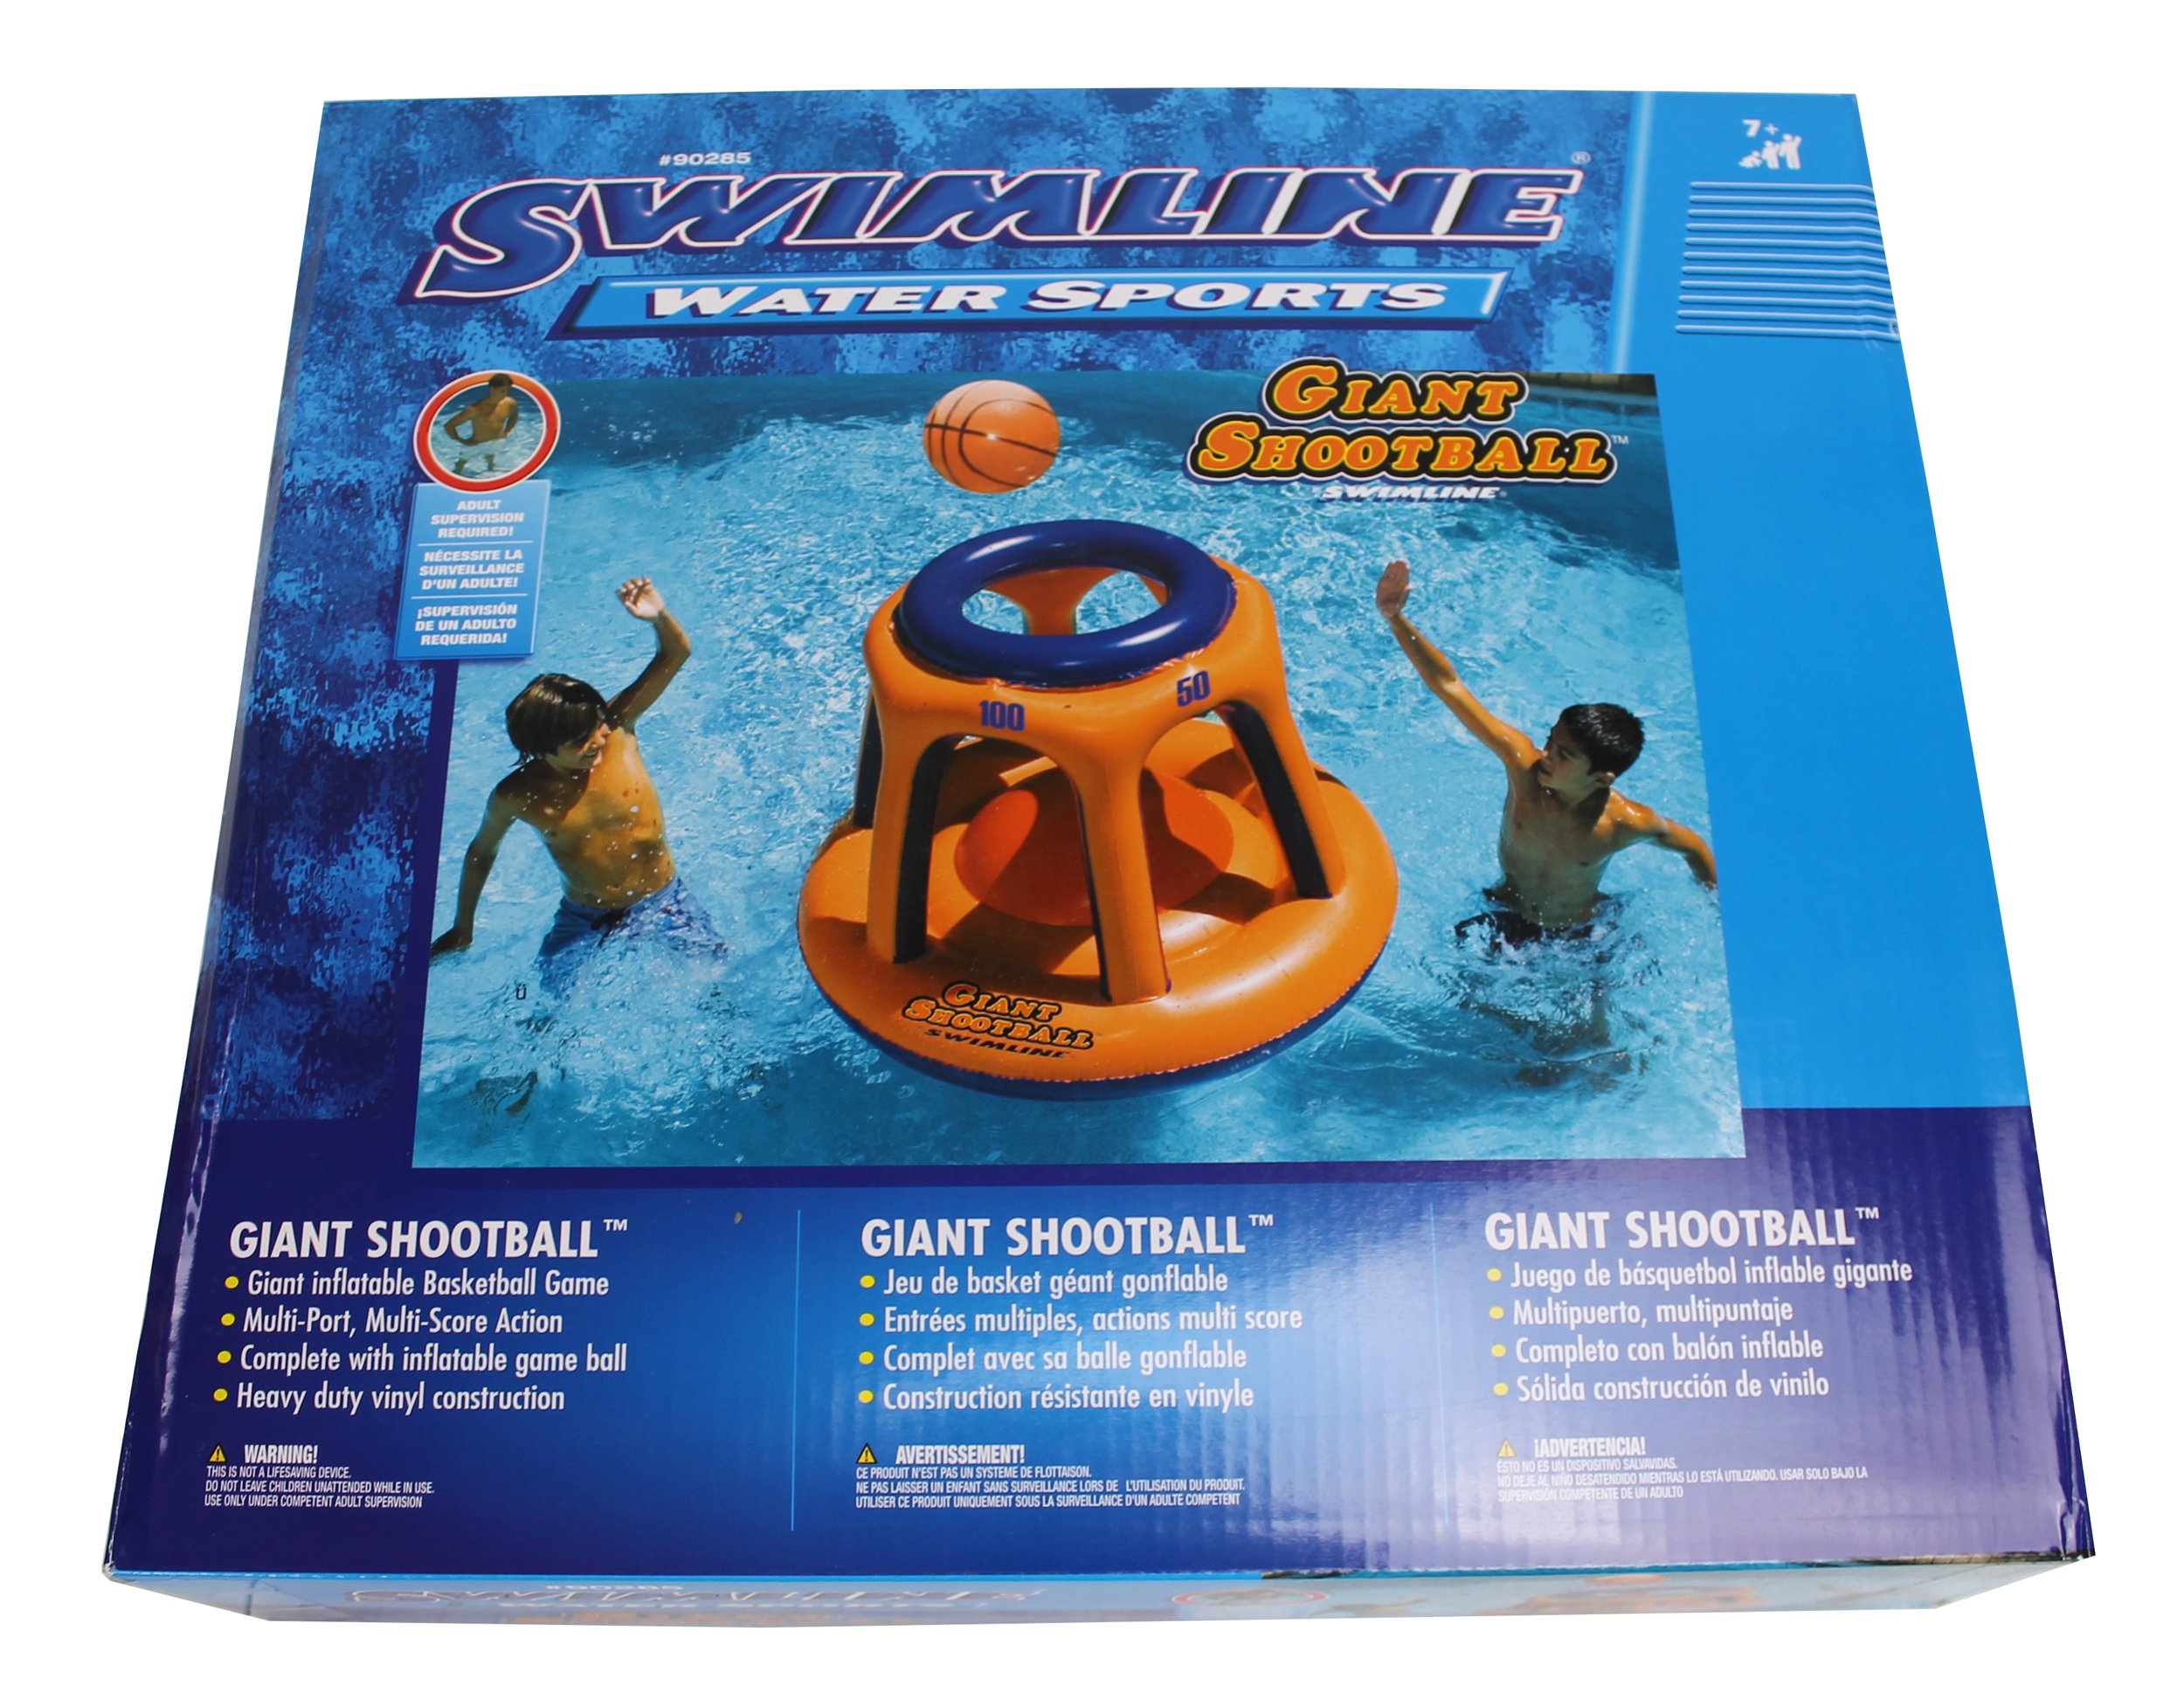 SWIMLINE Inflatable Pool Basketball Hoop Floating Or Poolside Game Giant Shootball Multiple Scoring Ports For Kids & Adults Swimming Splash Hoops With Water Basketball Pools Toy Outdoor Summer Hoops - image 4 of 5